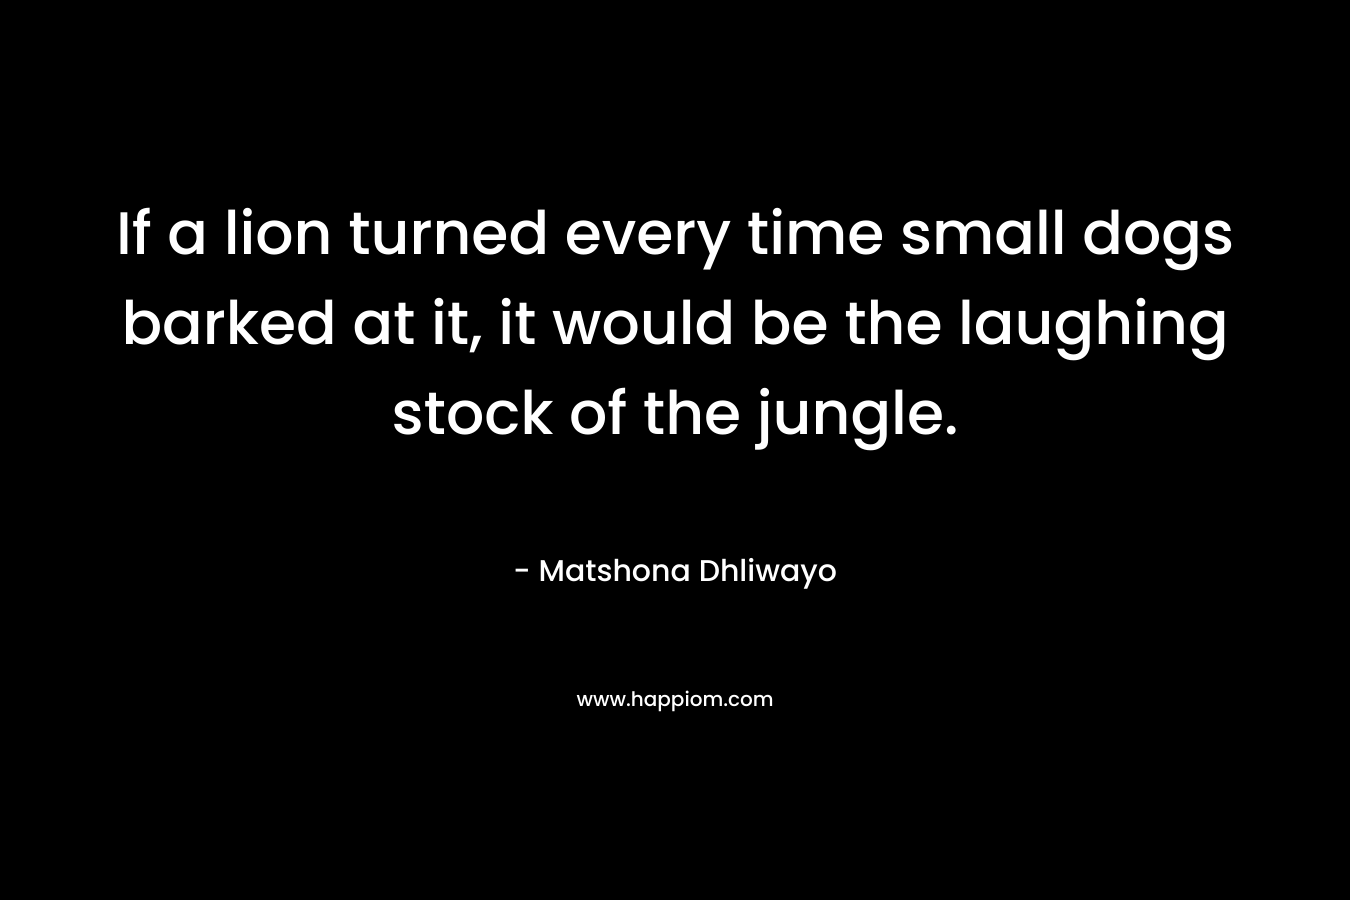 If a lion turned every time small dogs barked at it, it would be the laughing stock of the jungle. – Matshona Dhliwayo